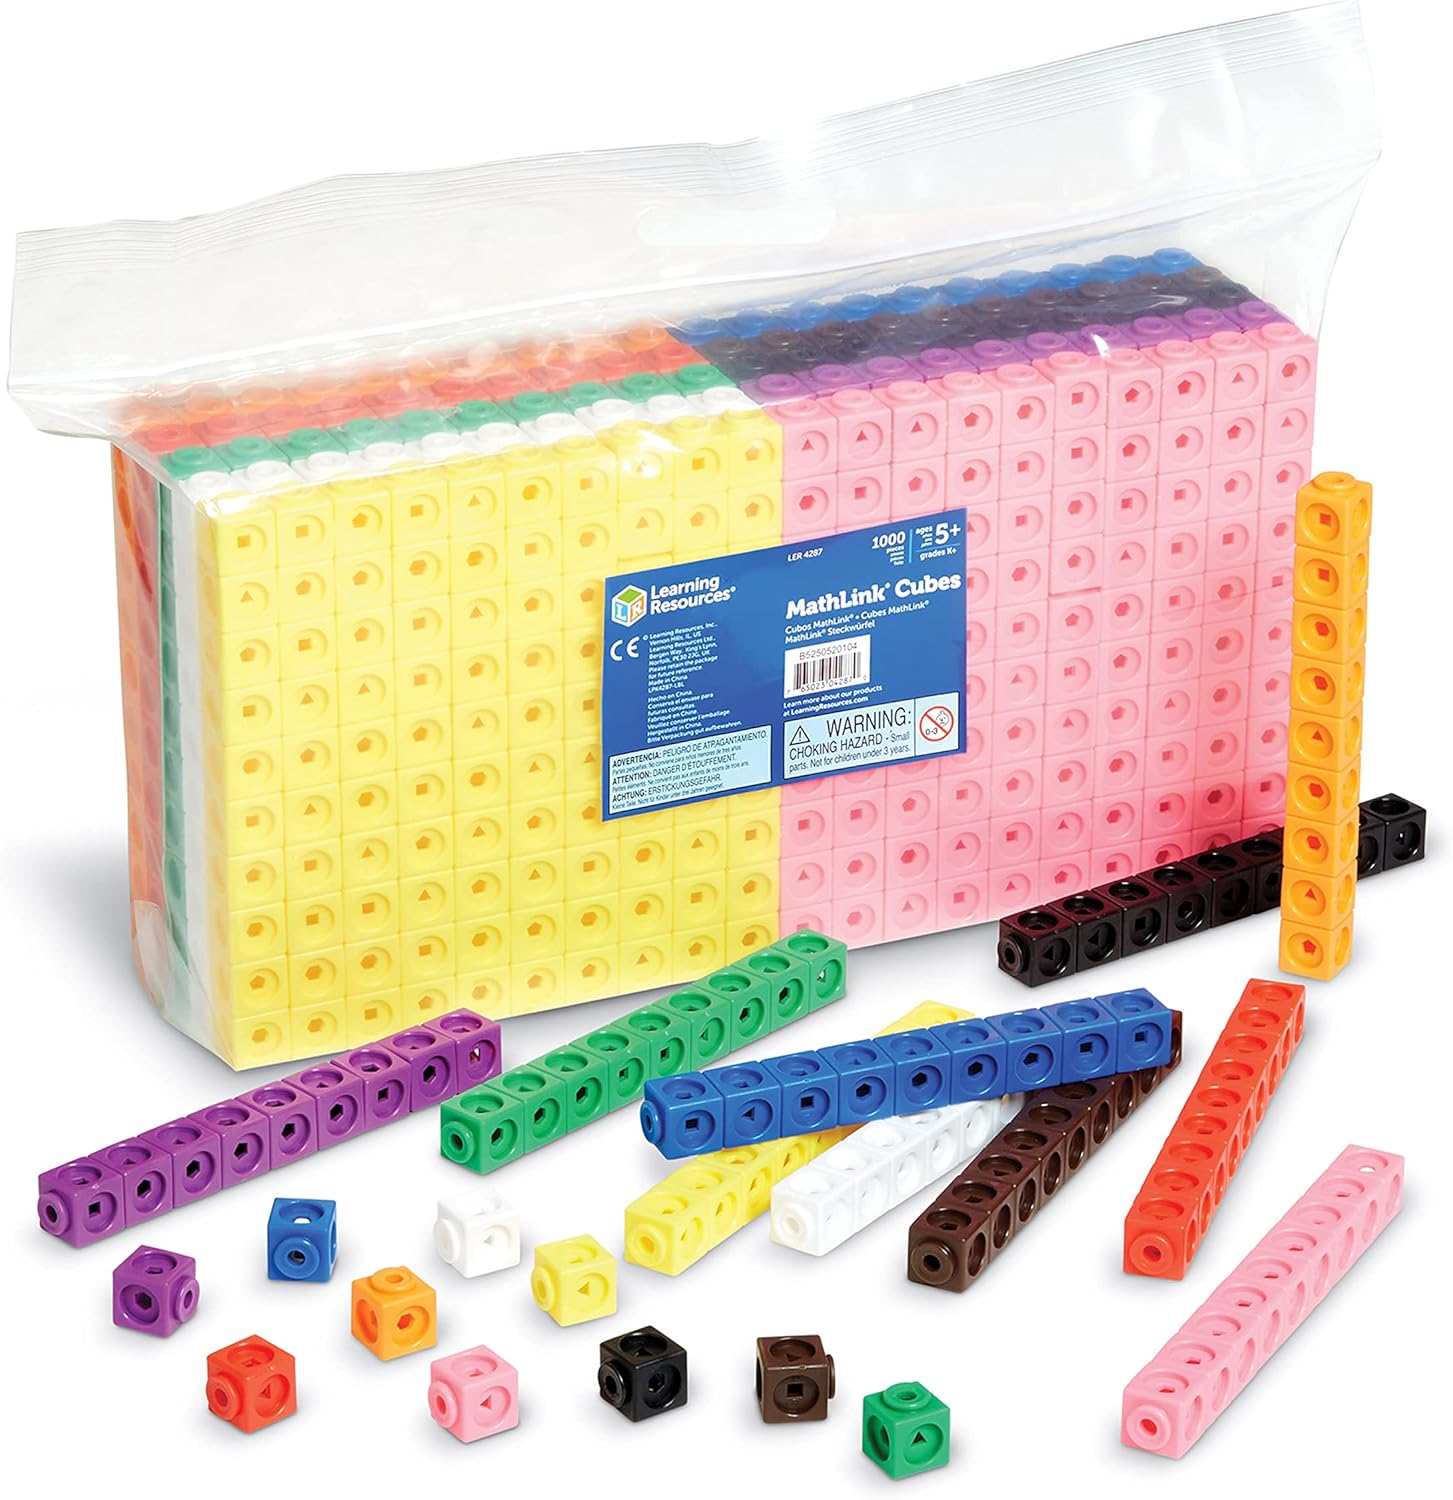 Plastic Interlocking Math Link Cubes Educational Counting Toys Math Cubes 